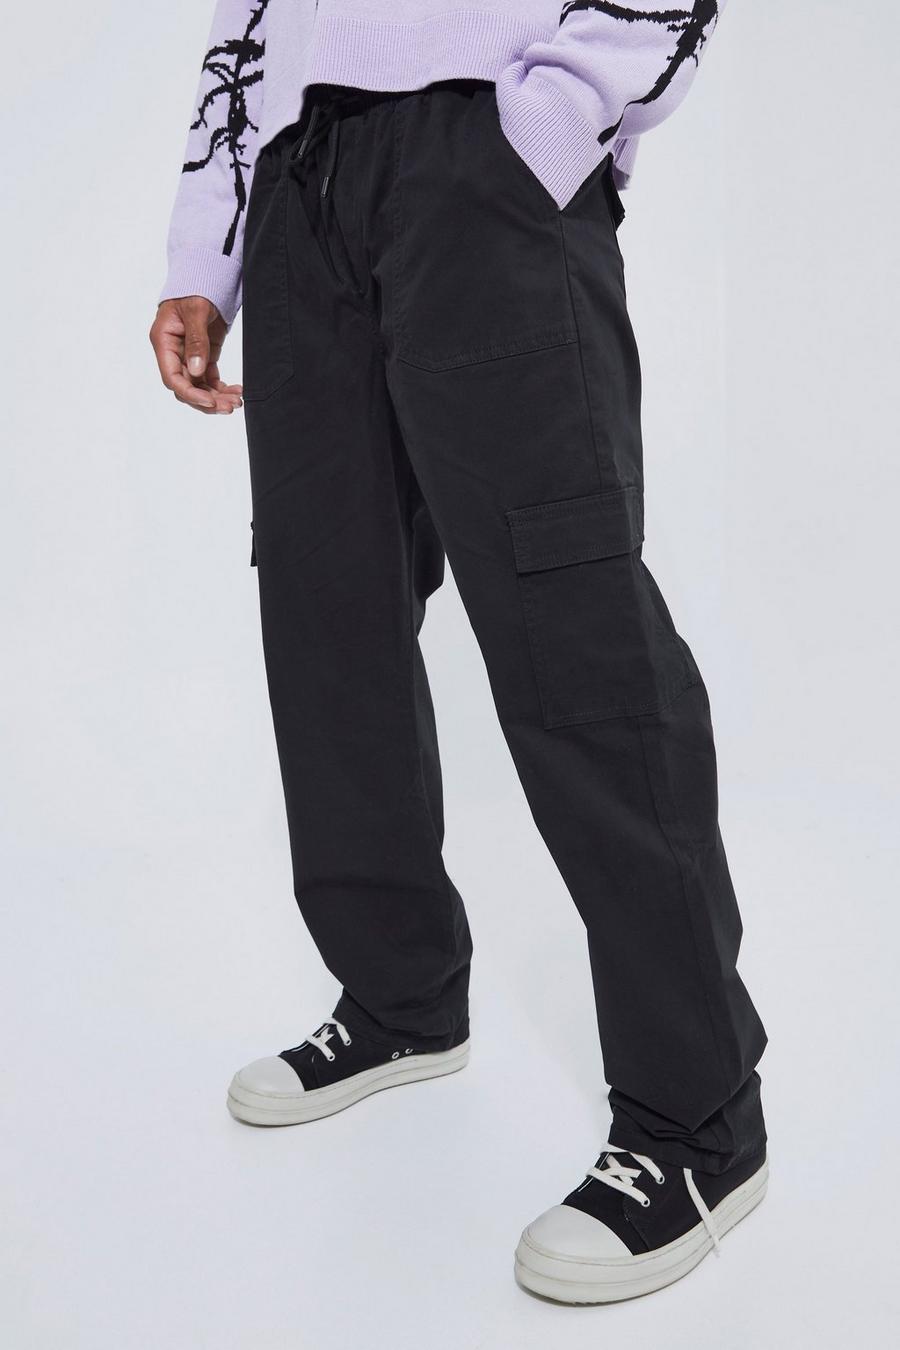 Black Elastic Waist Relaxed Fit Cargo Pants